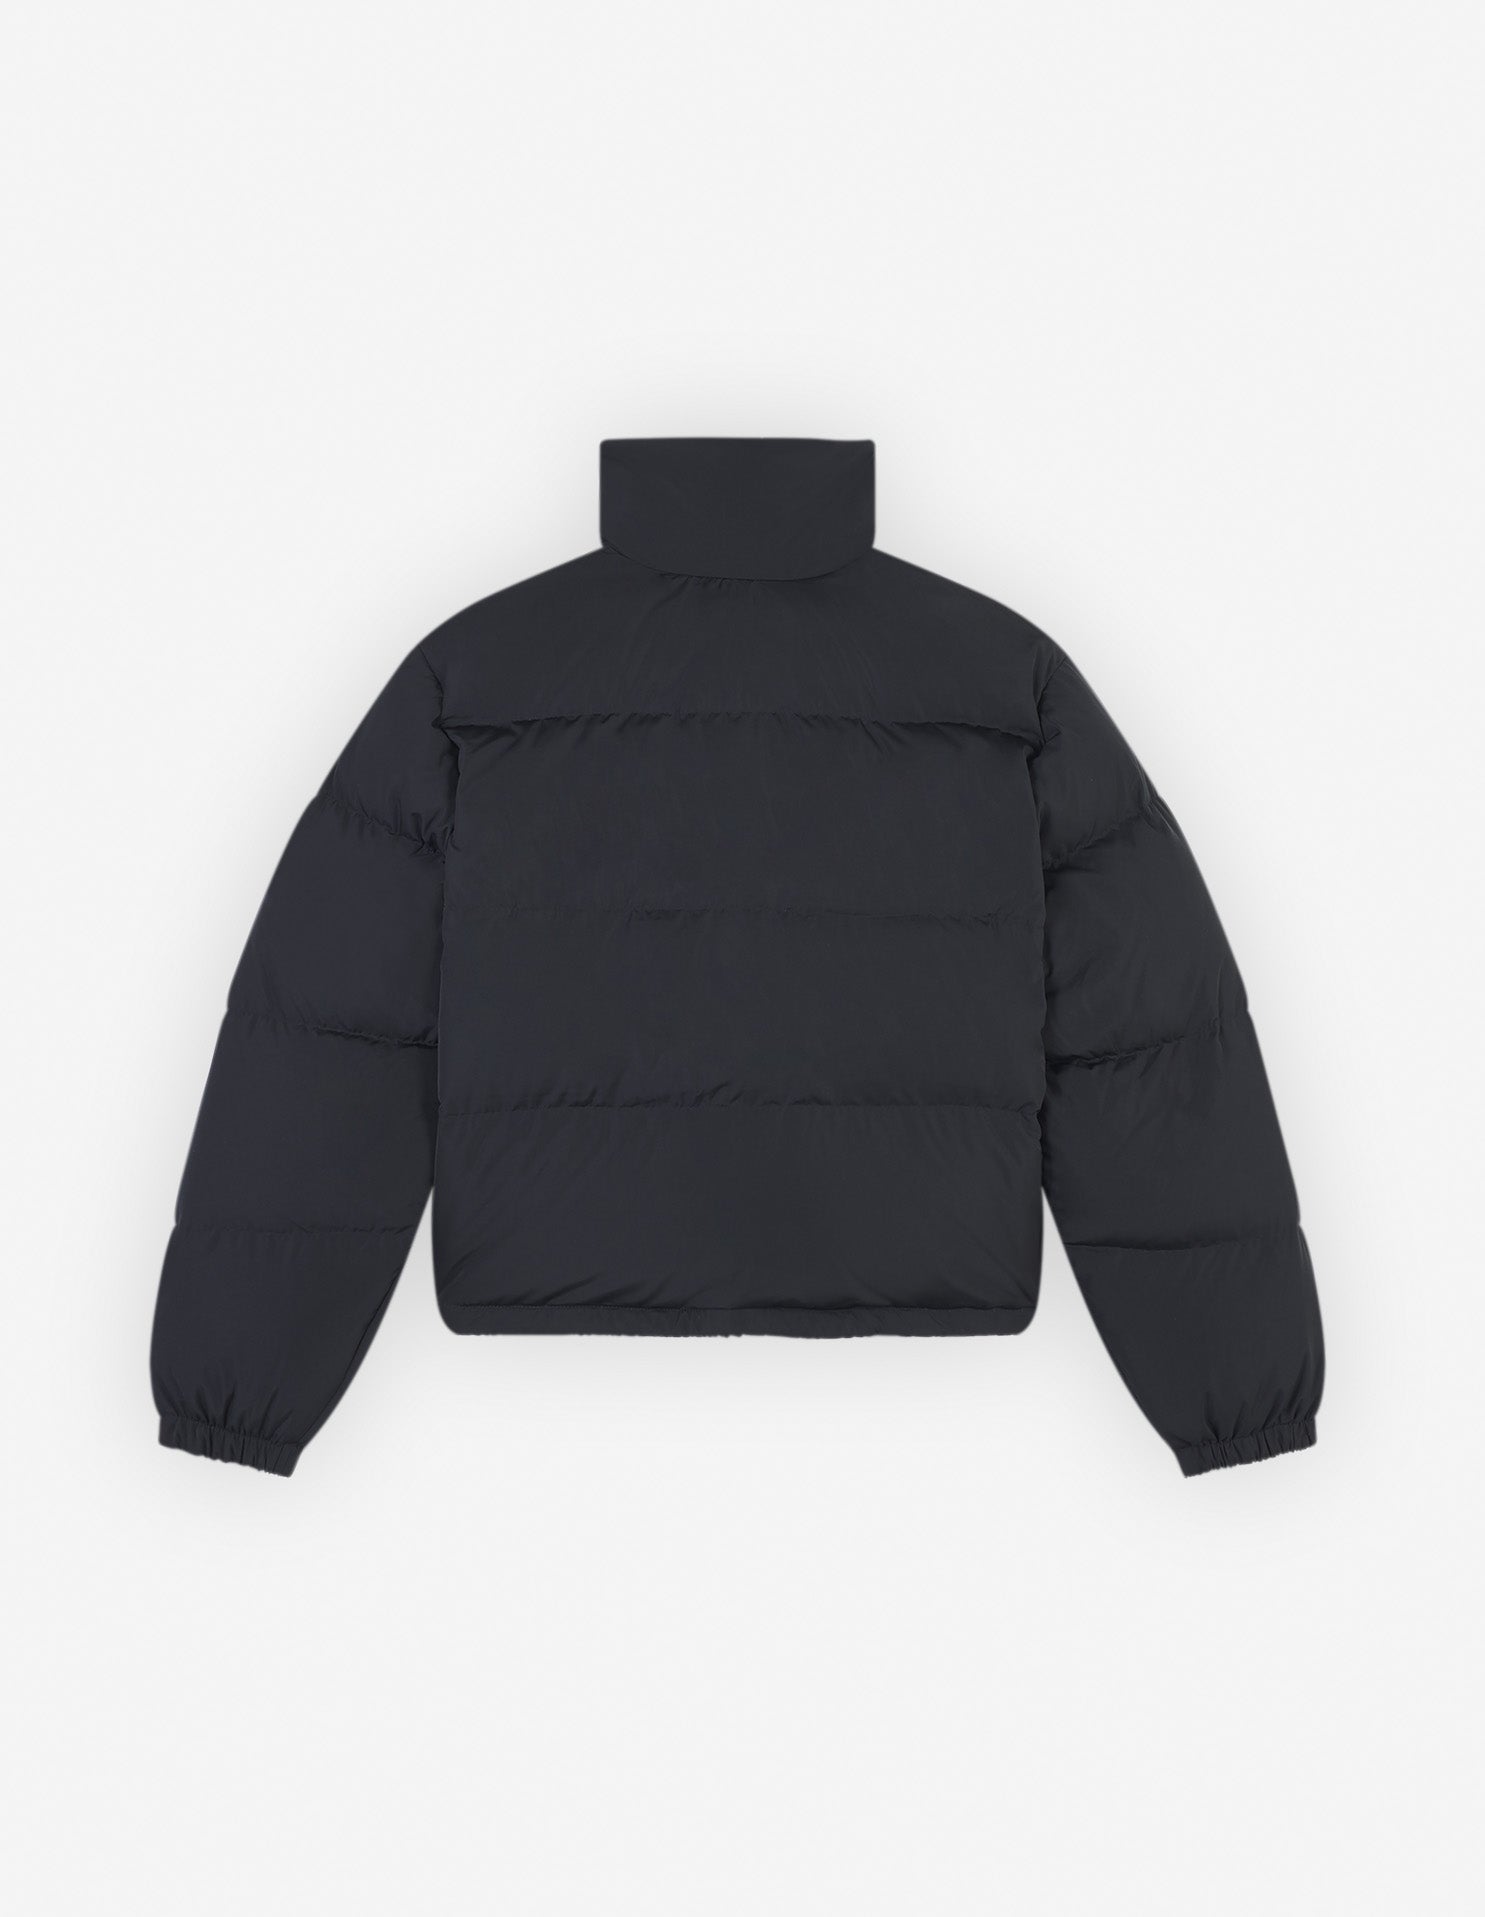 Maison Kitsune Women's Cropped Puffer In Nylon With Bold Fox Head Patch Black LW02207WQ4016 P199